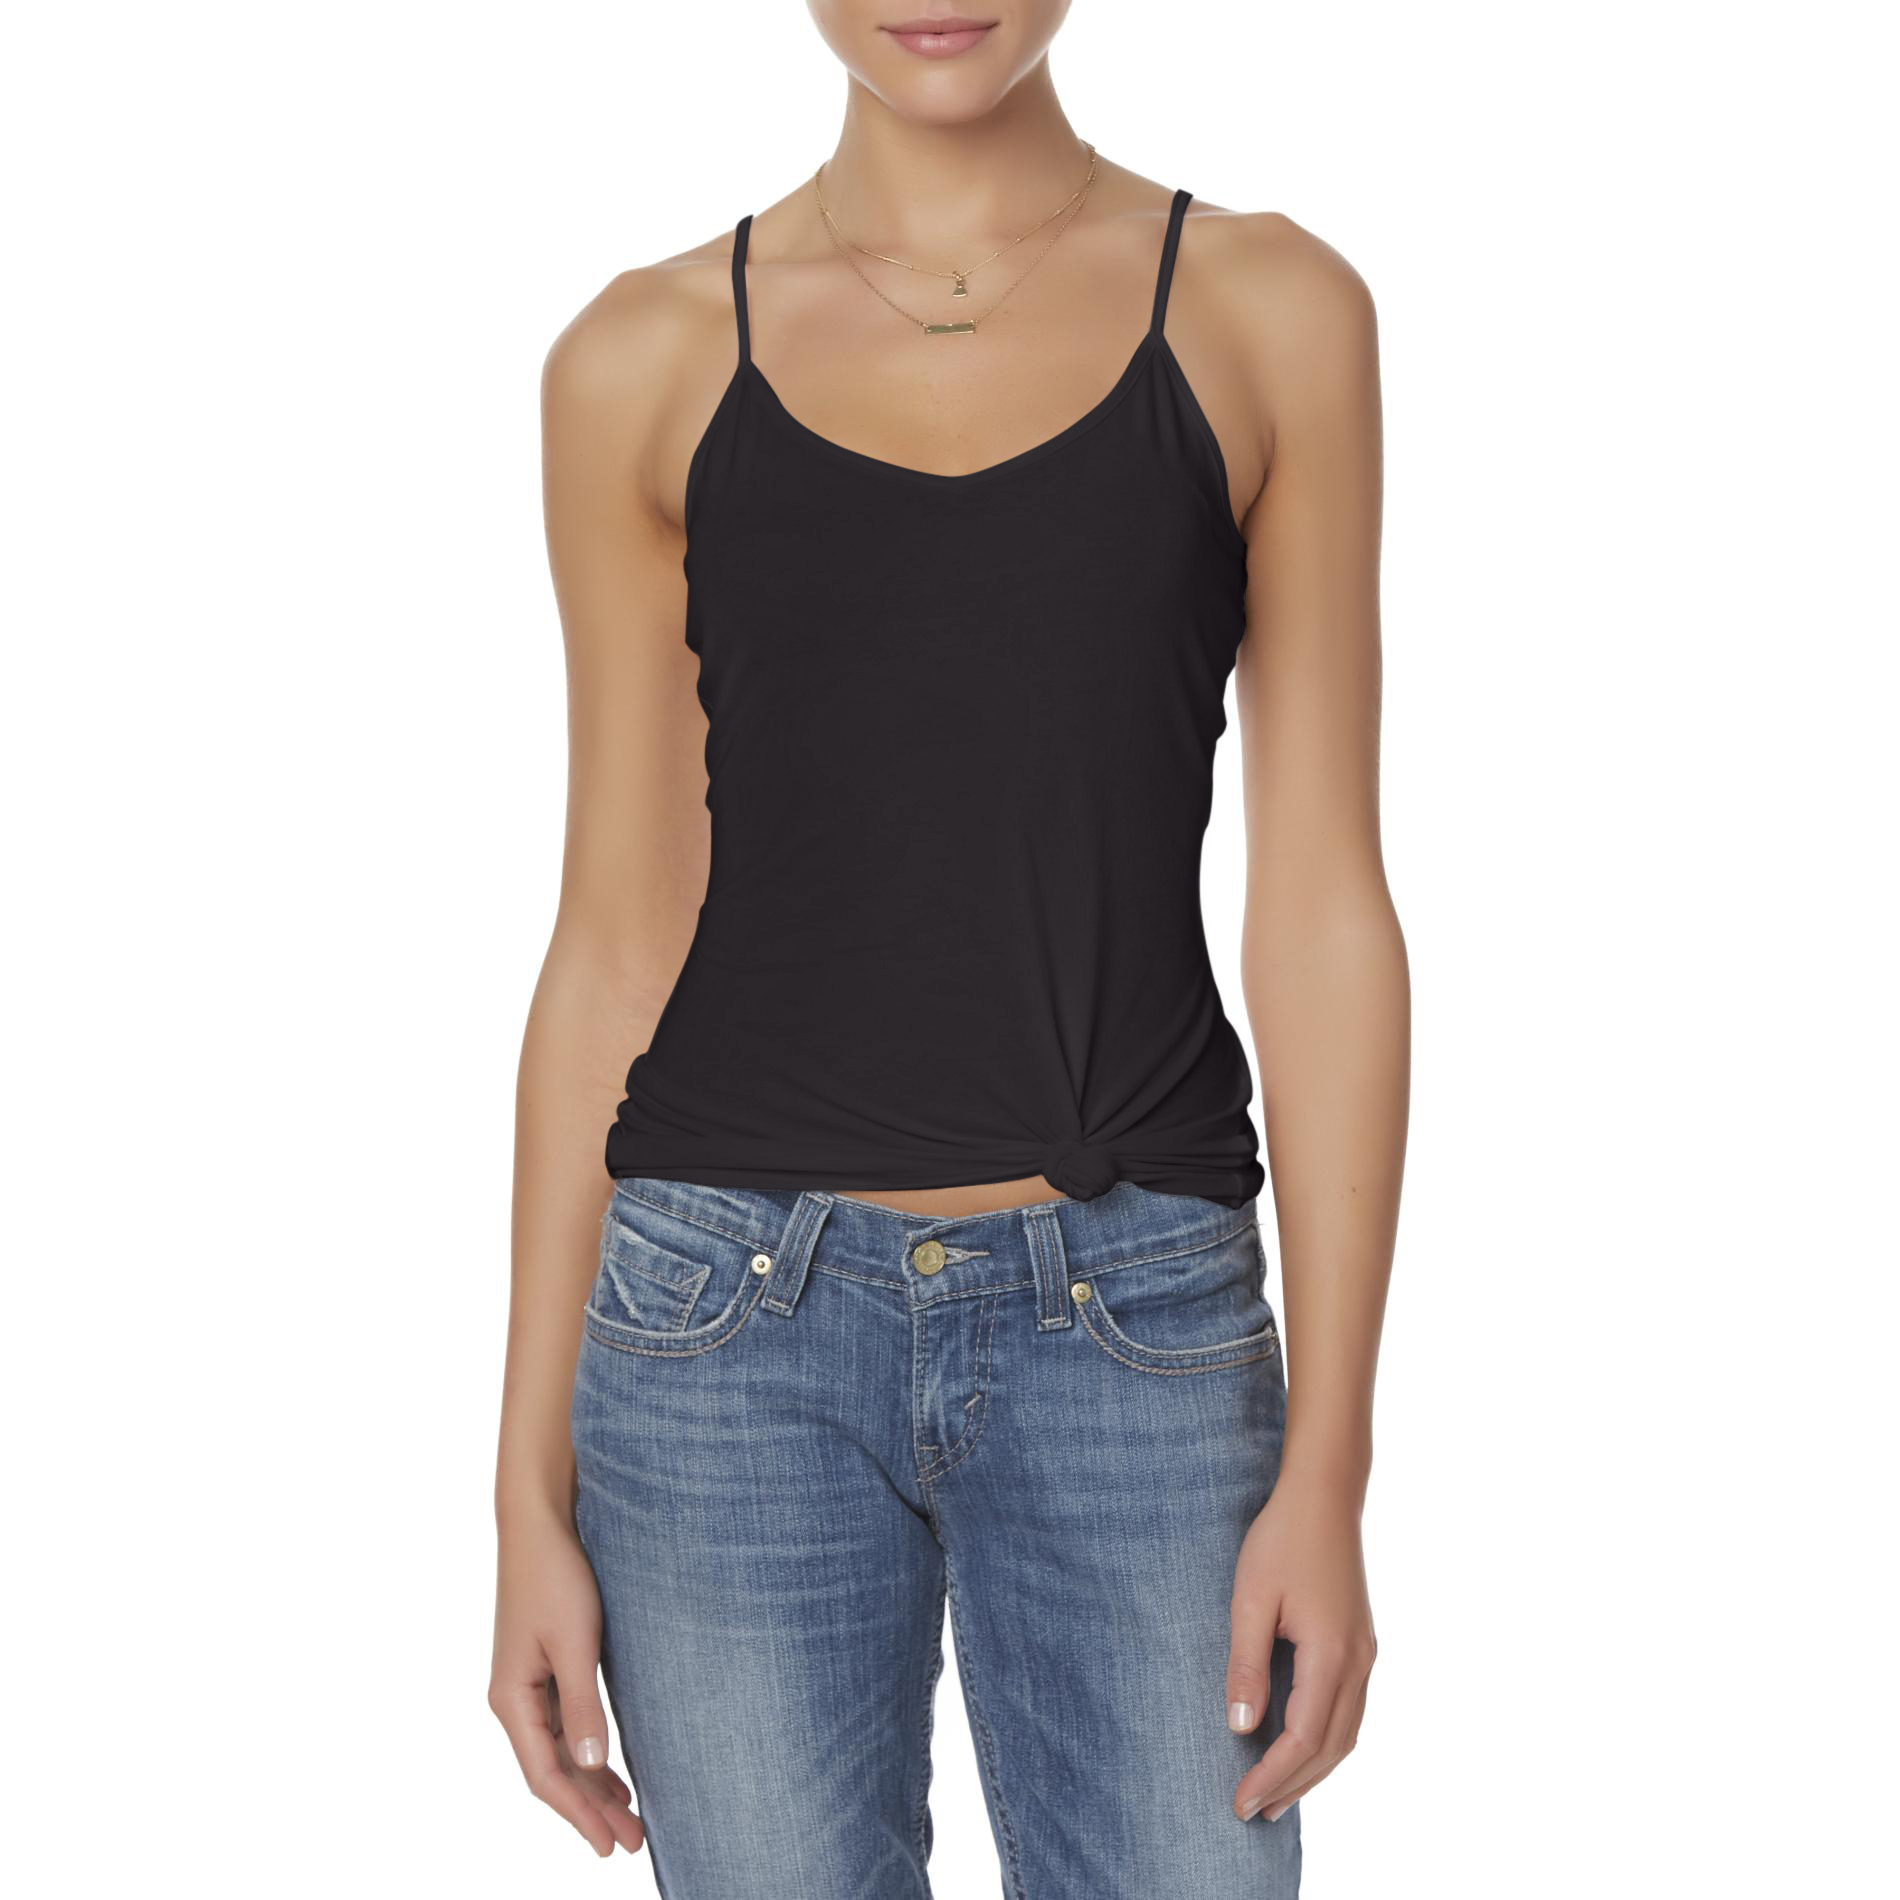 Simply Styled Women's Cami